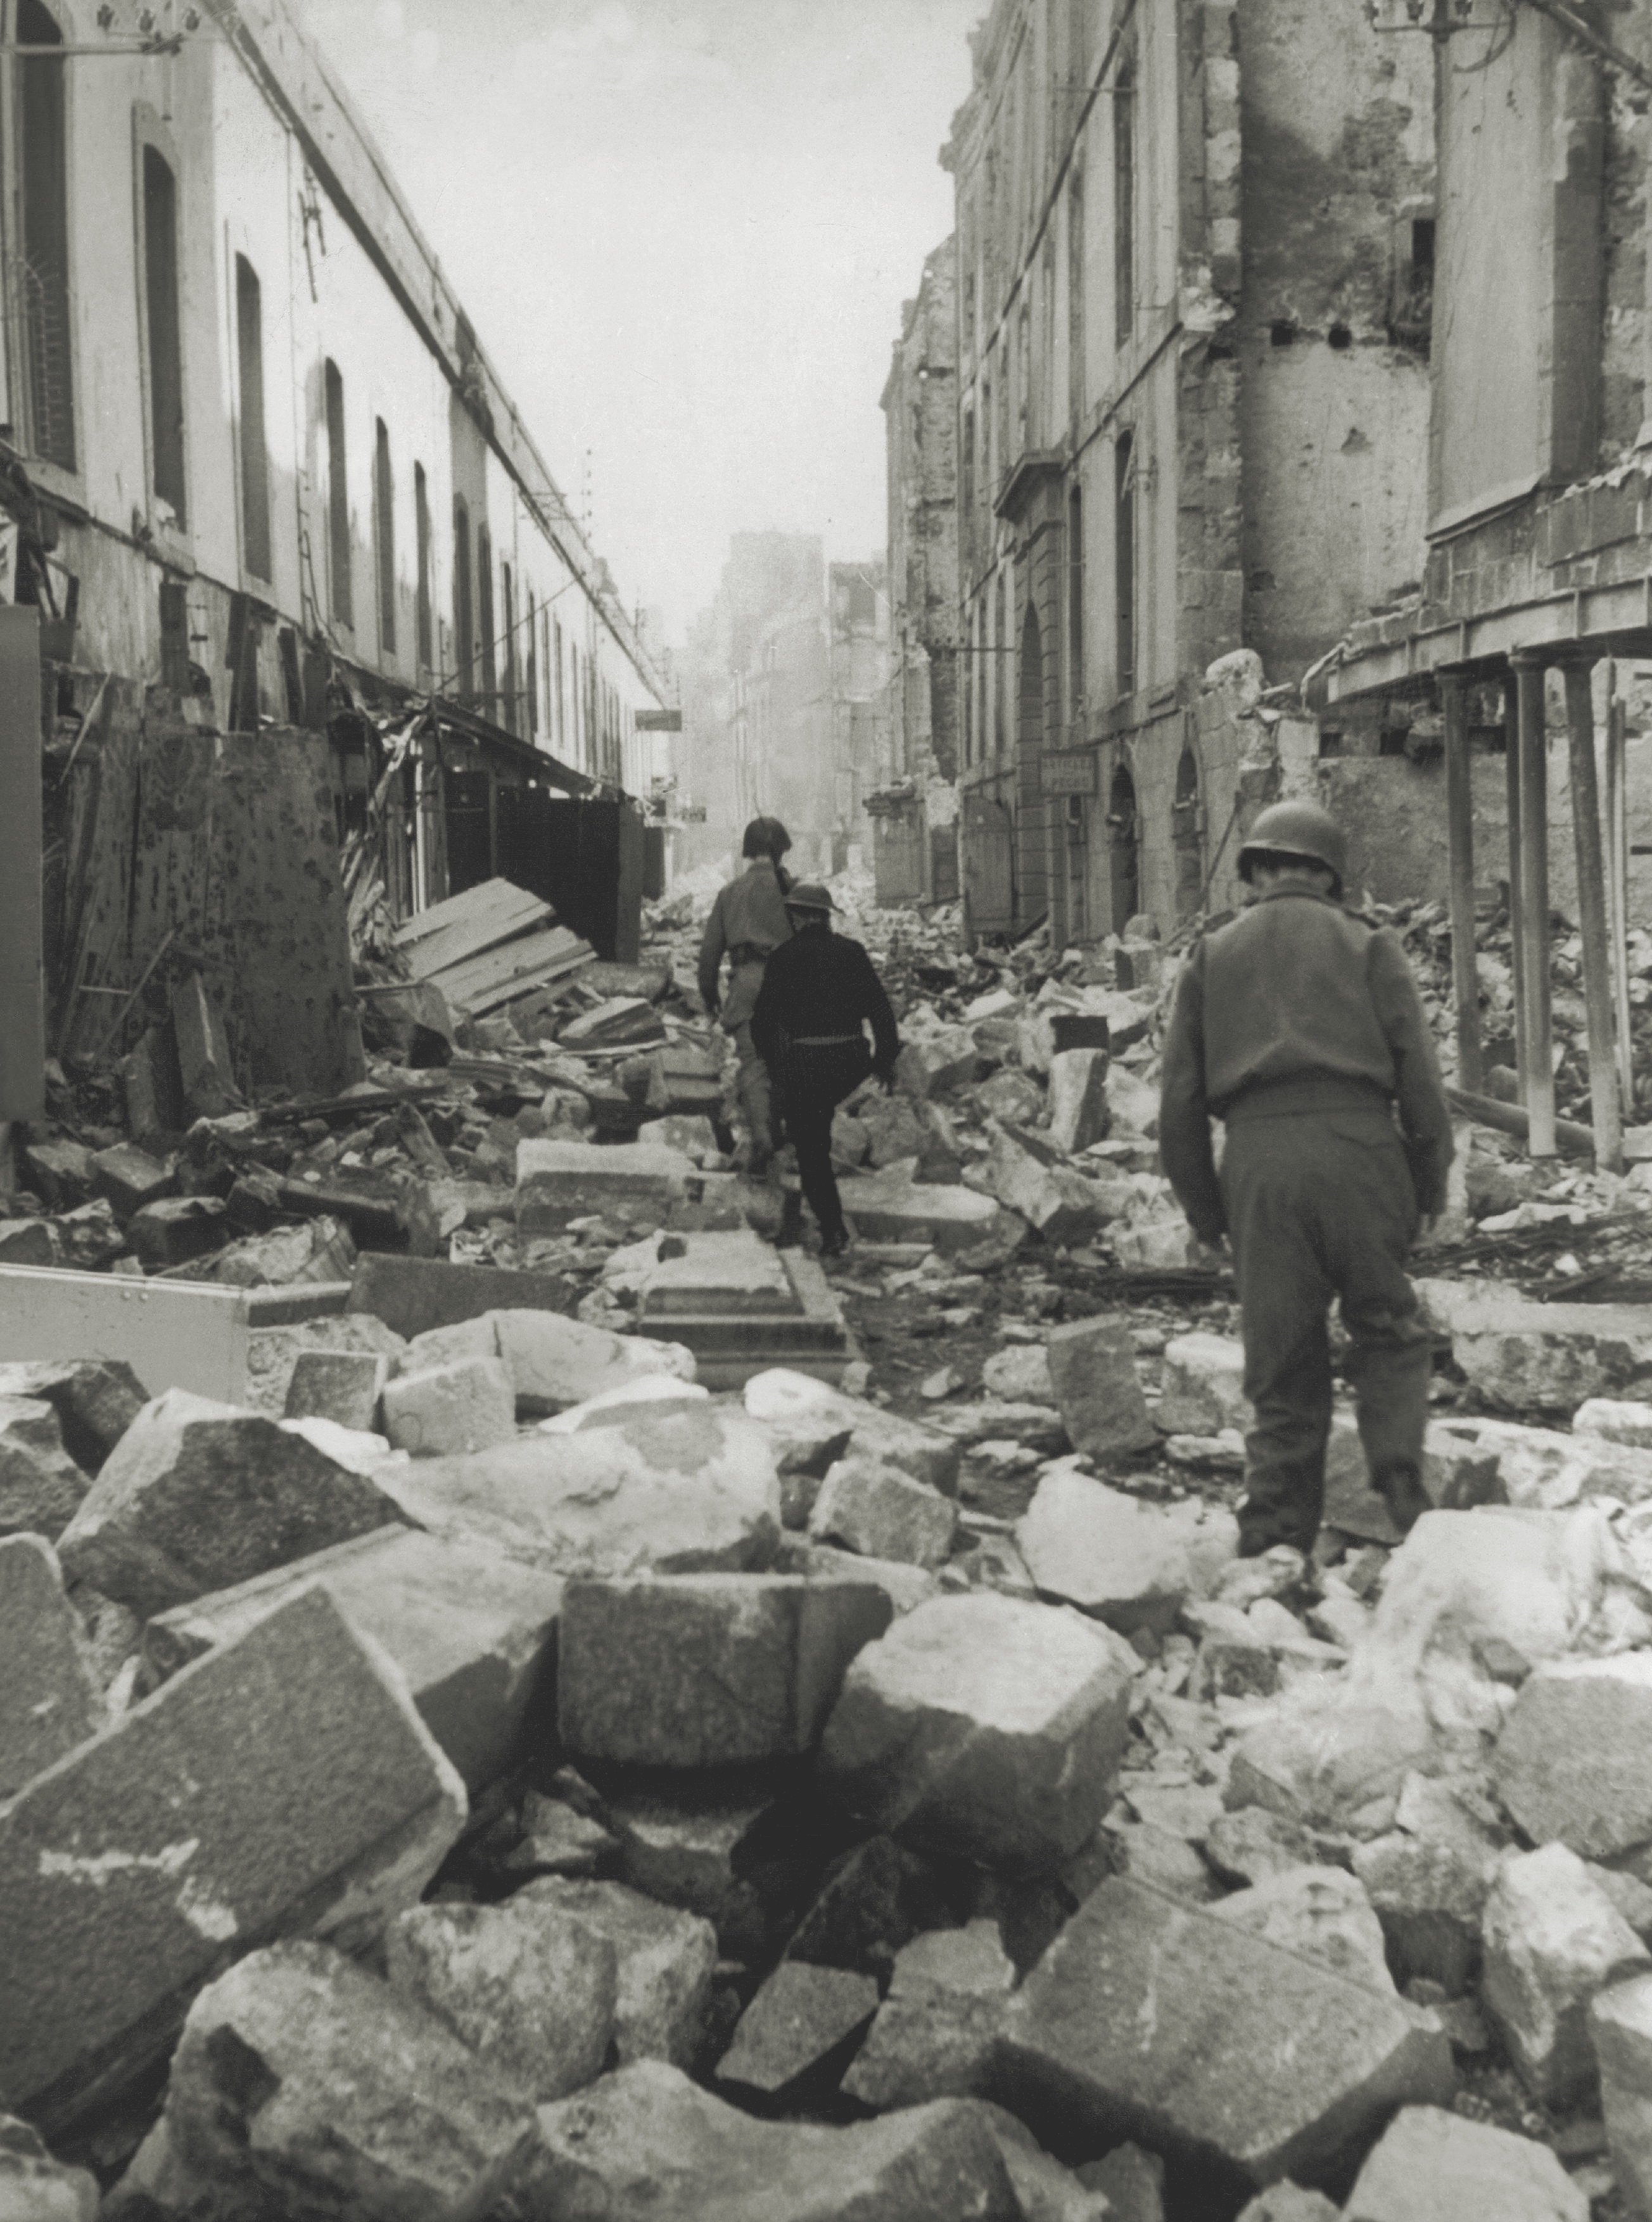 Soldiers make their way through the city’s rubble-strewn streets on August 24. (National Archives, PhotosNormandie)